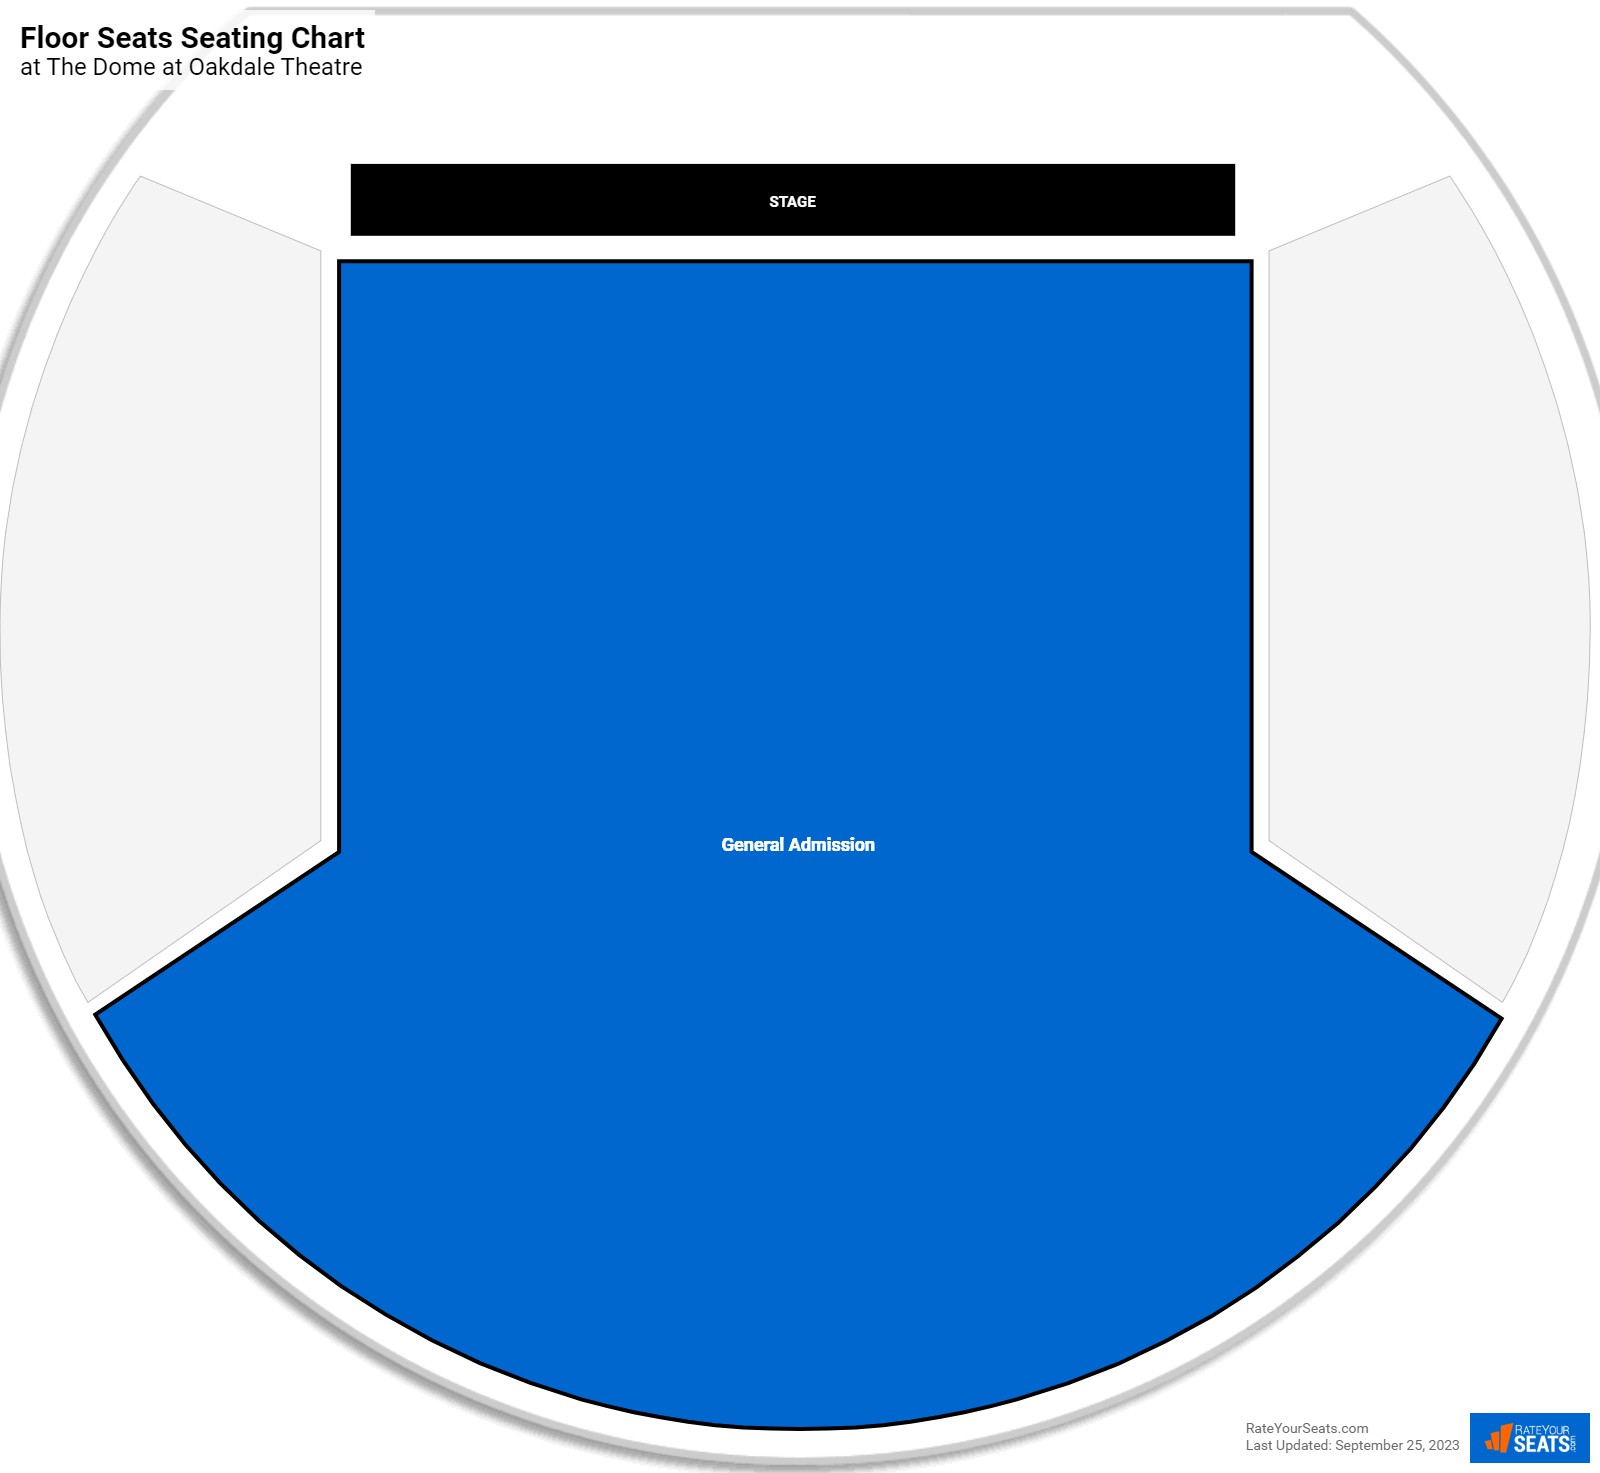 Concert Floor Seats Seating Chart at The Dome at Oakdale Theatre